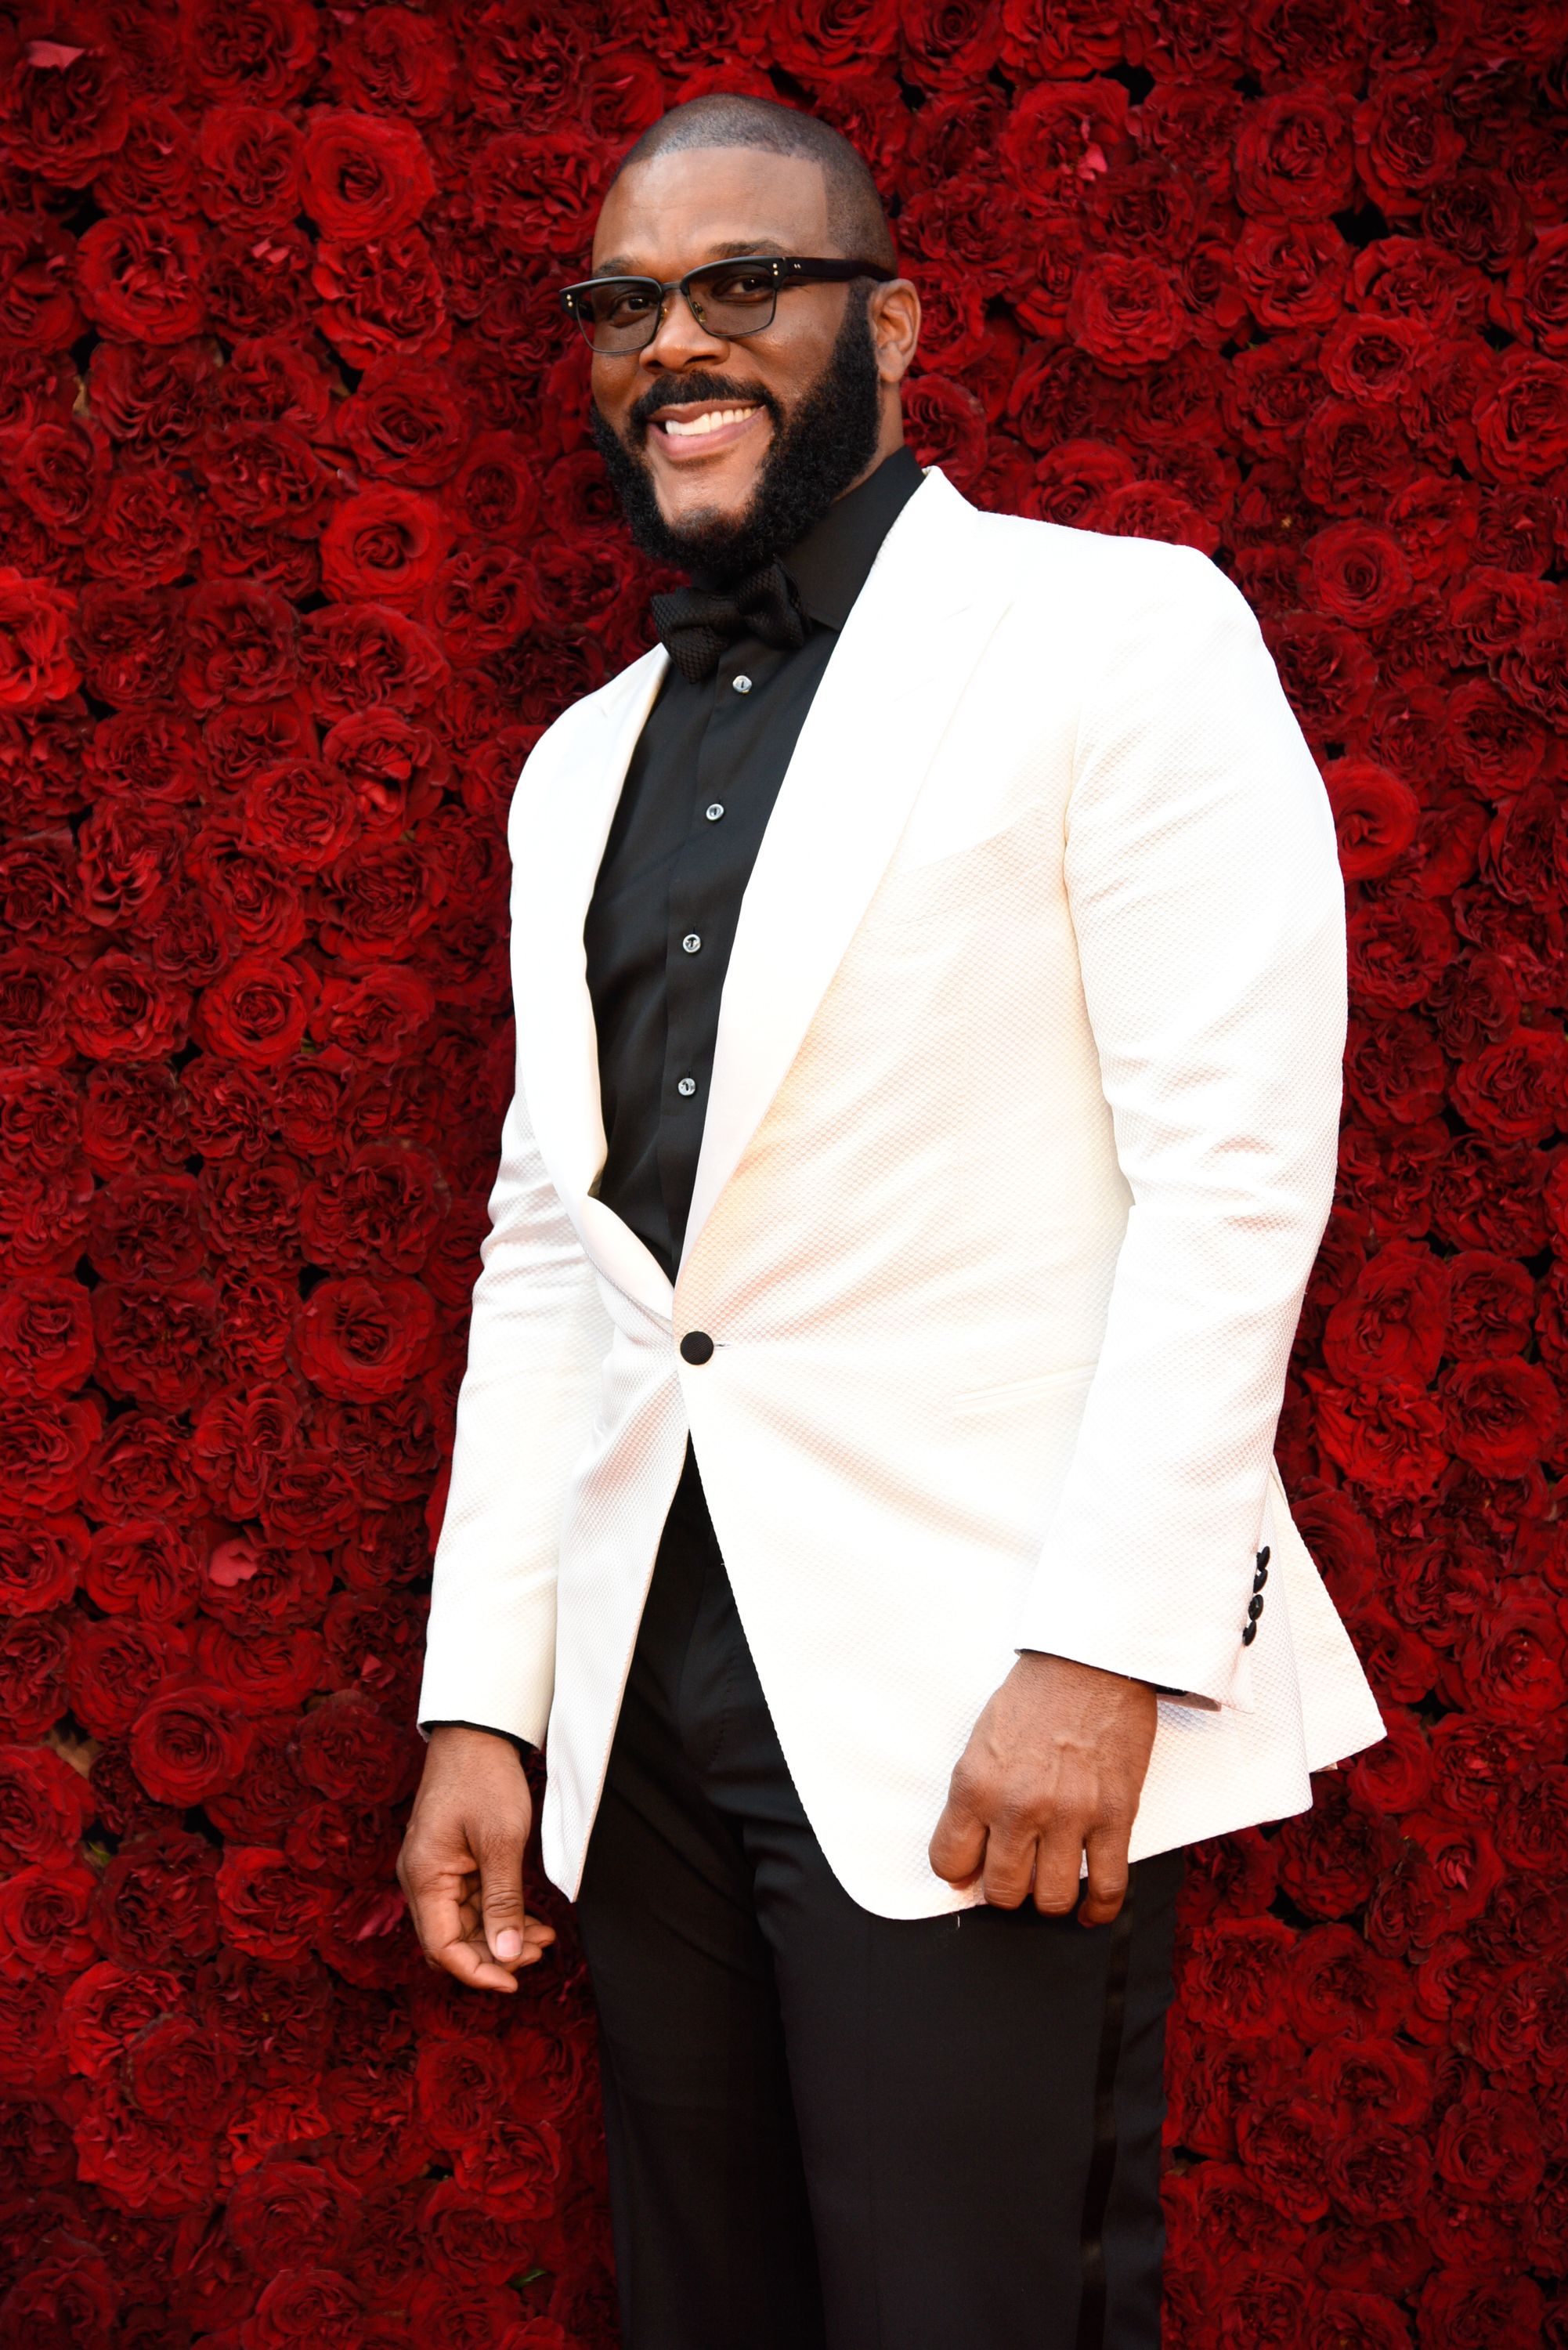 Tyler Perry attends Tyler Perry Studios grand opening gala at Tyler Perry Studios on October 05, 2019 in Atlanta, Georgia. | Source: Getty Images